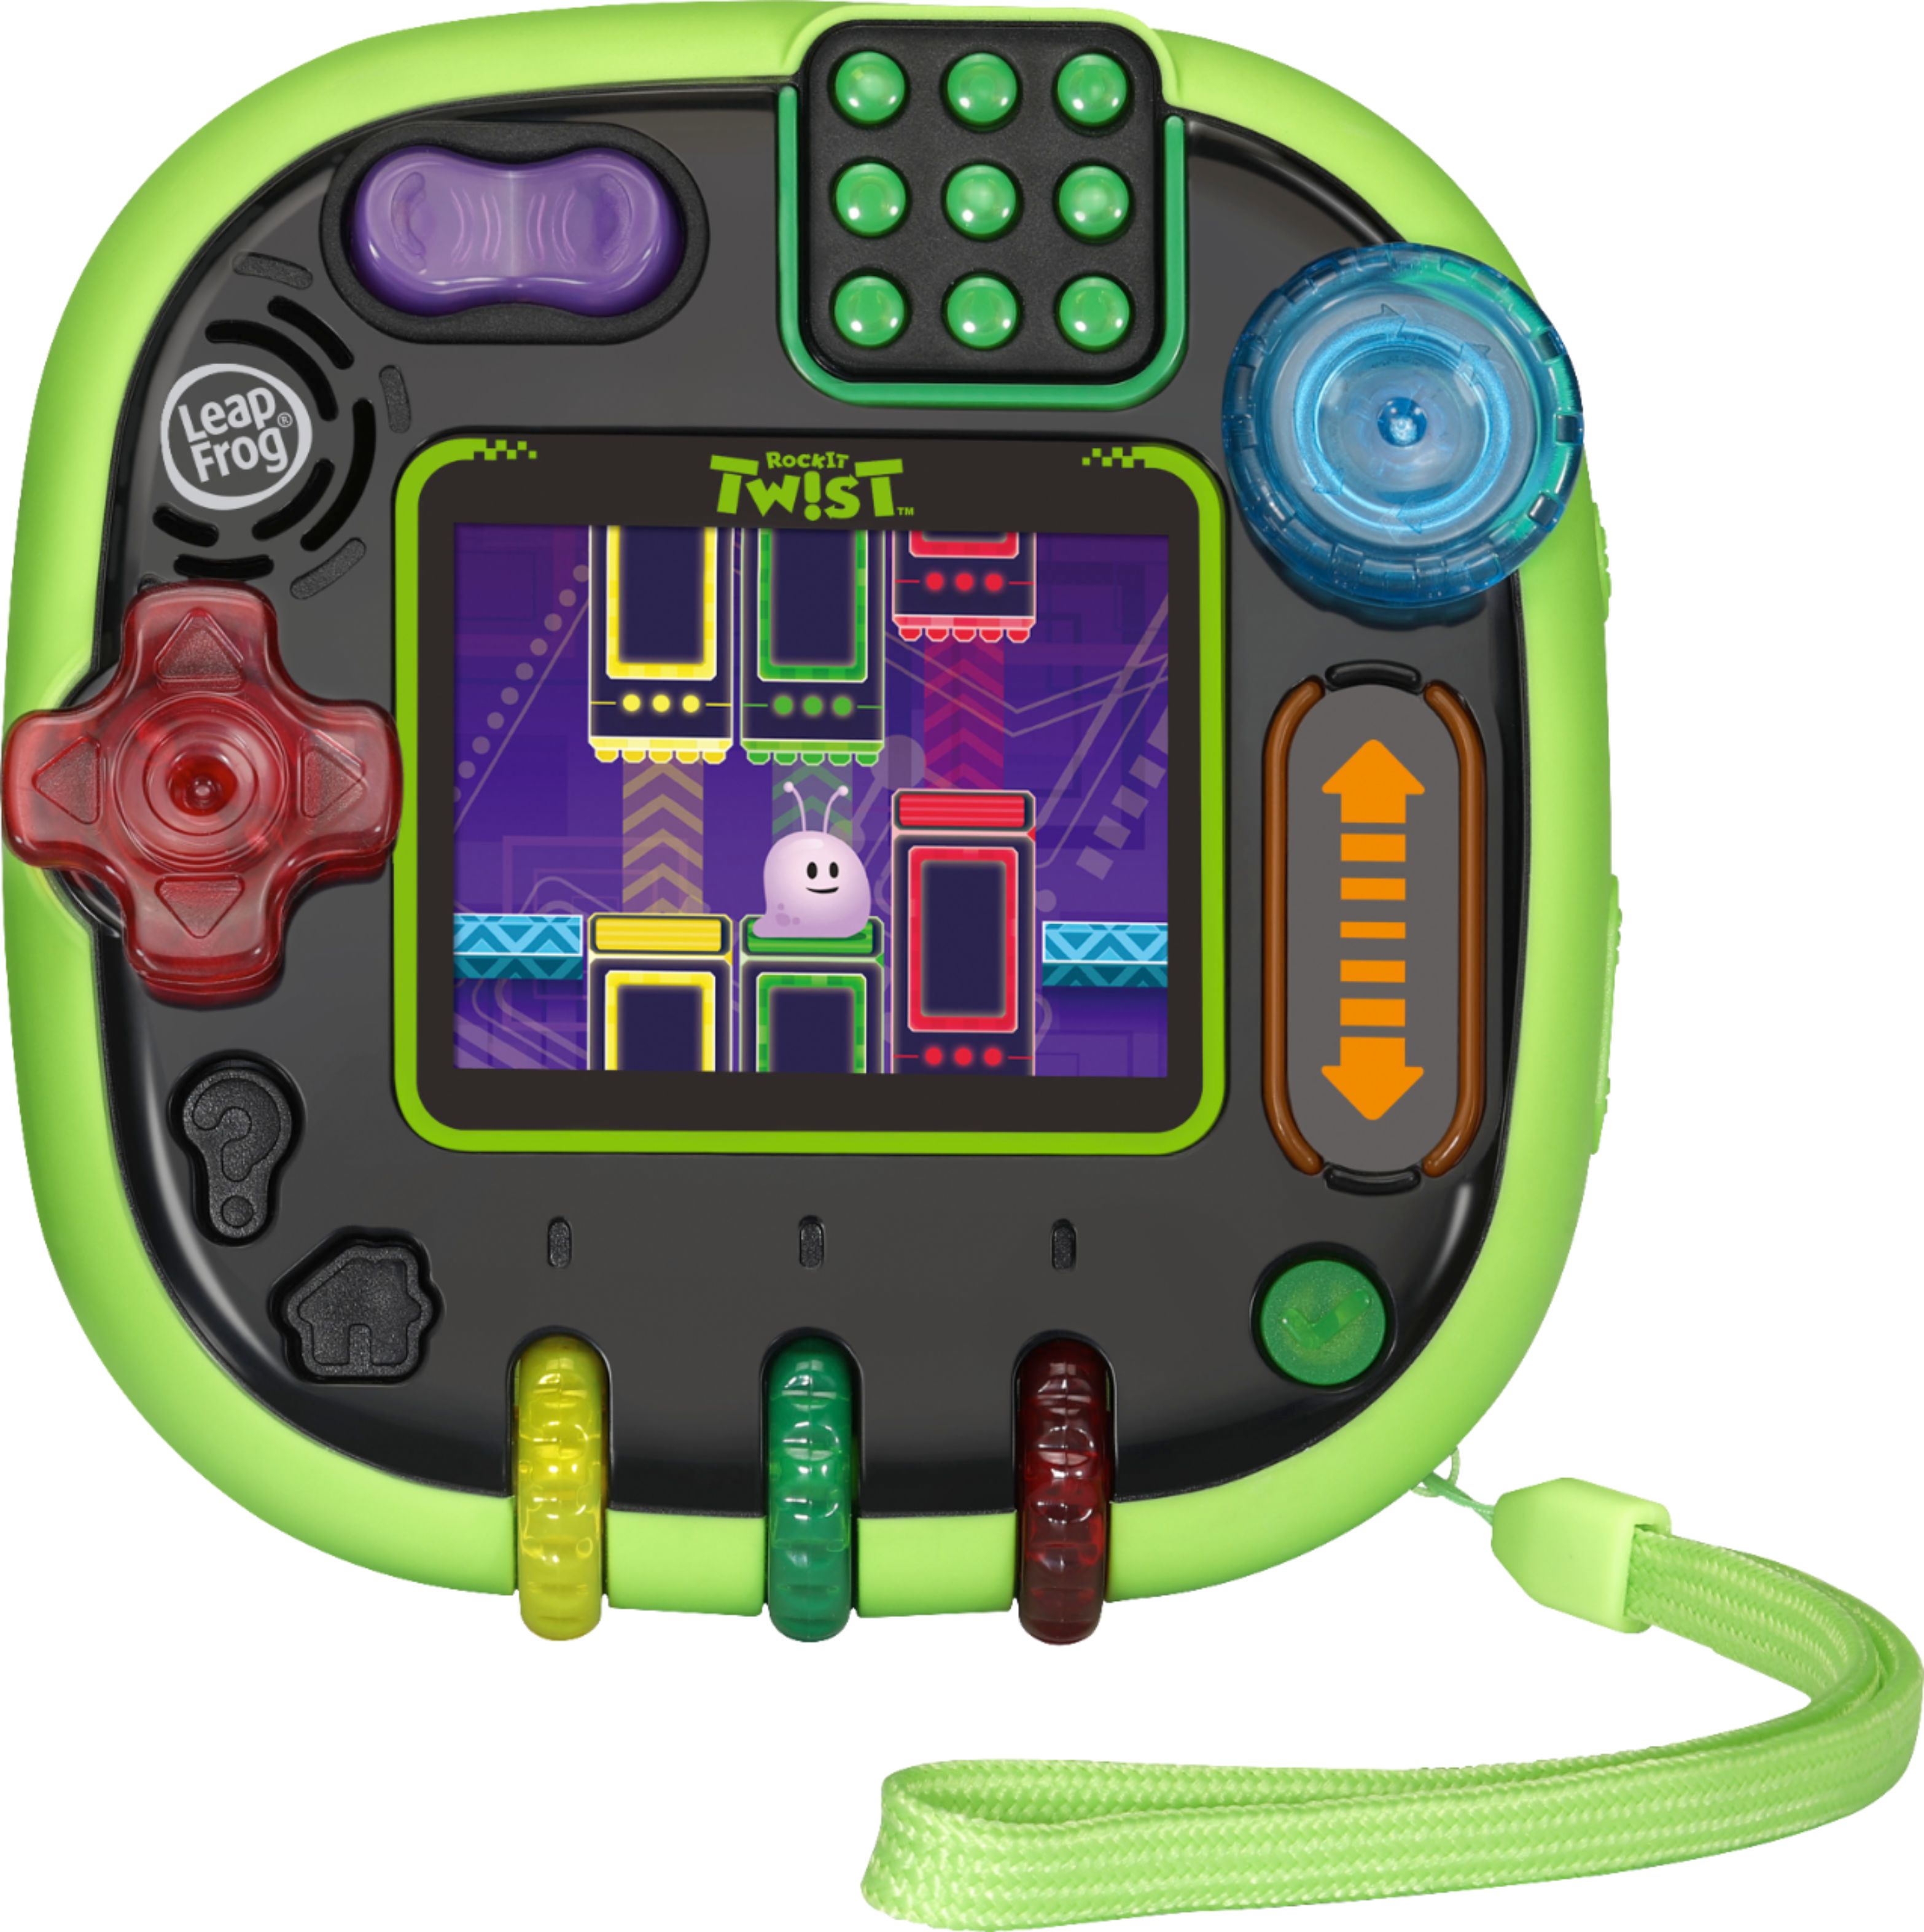 LeapFrog RockIt Twist Handheld Learning Game System Green Brand New 